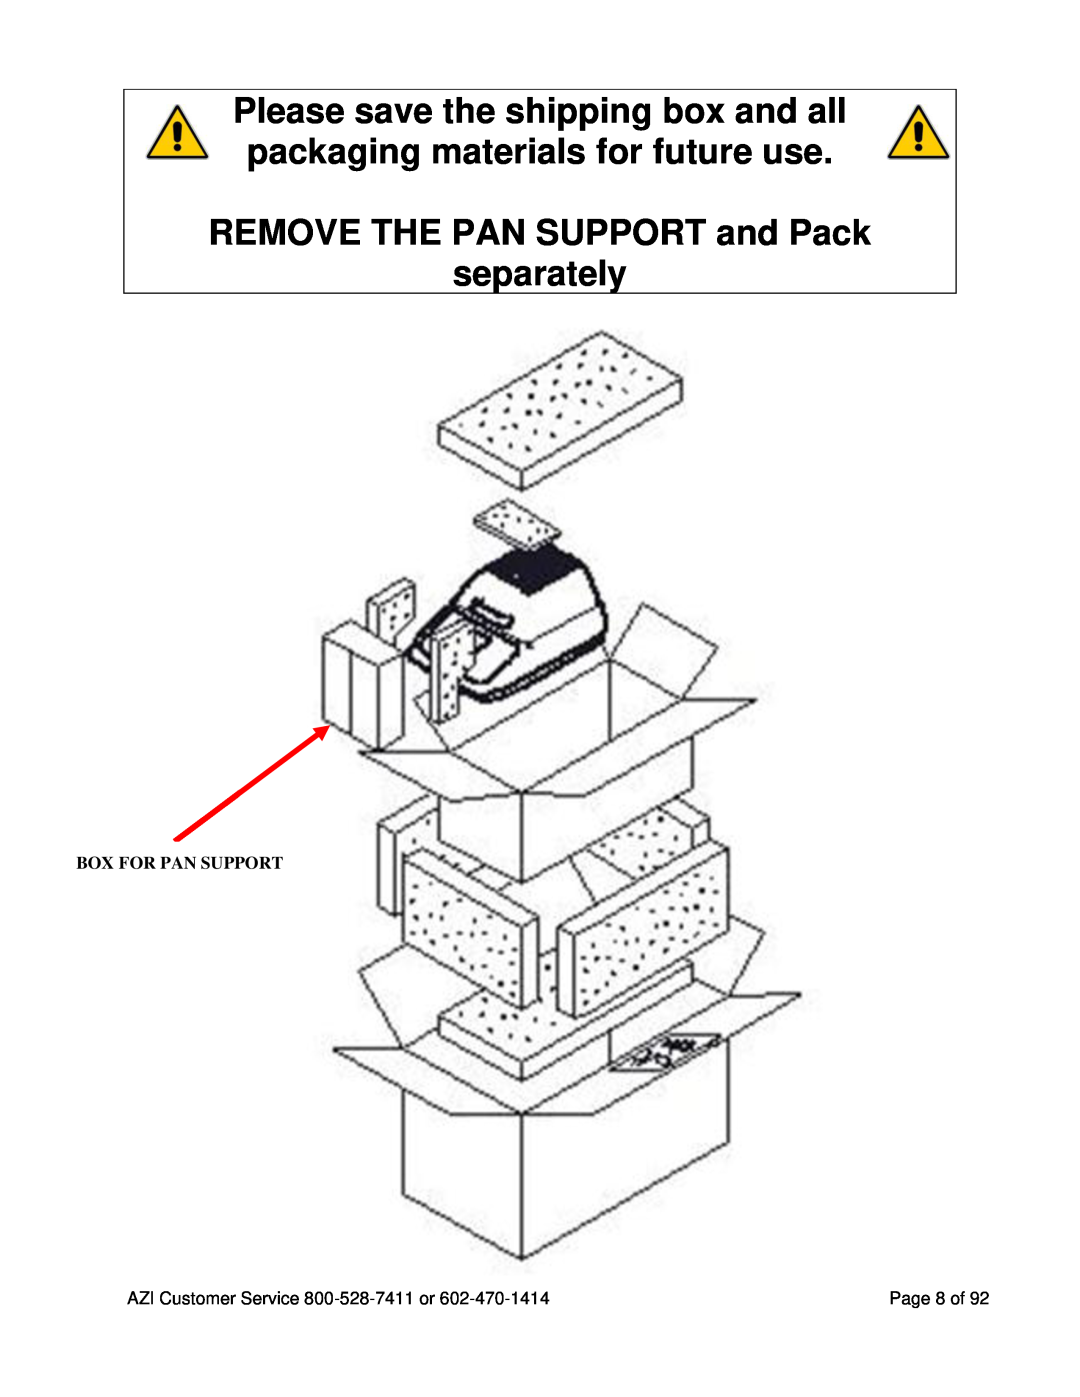 Arizona MAX-5000XL user manual REMOVE THE PAN SUPPORT and Pack separately, Box For Pan Support 